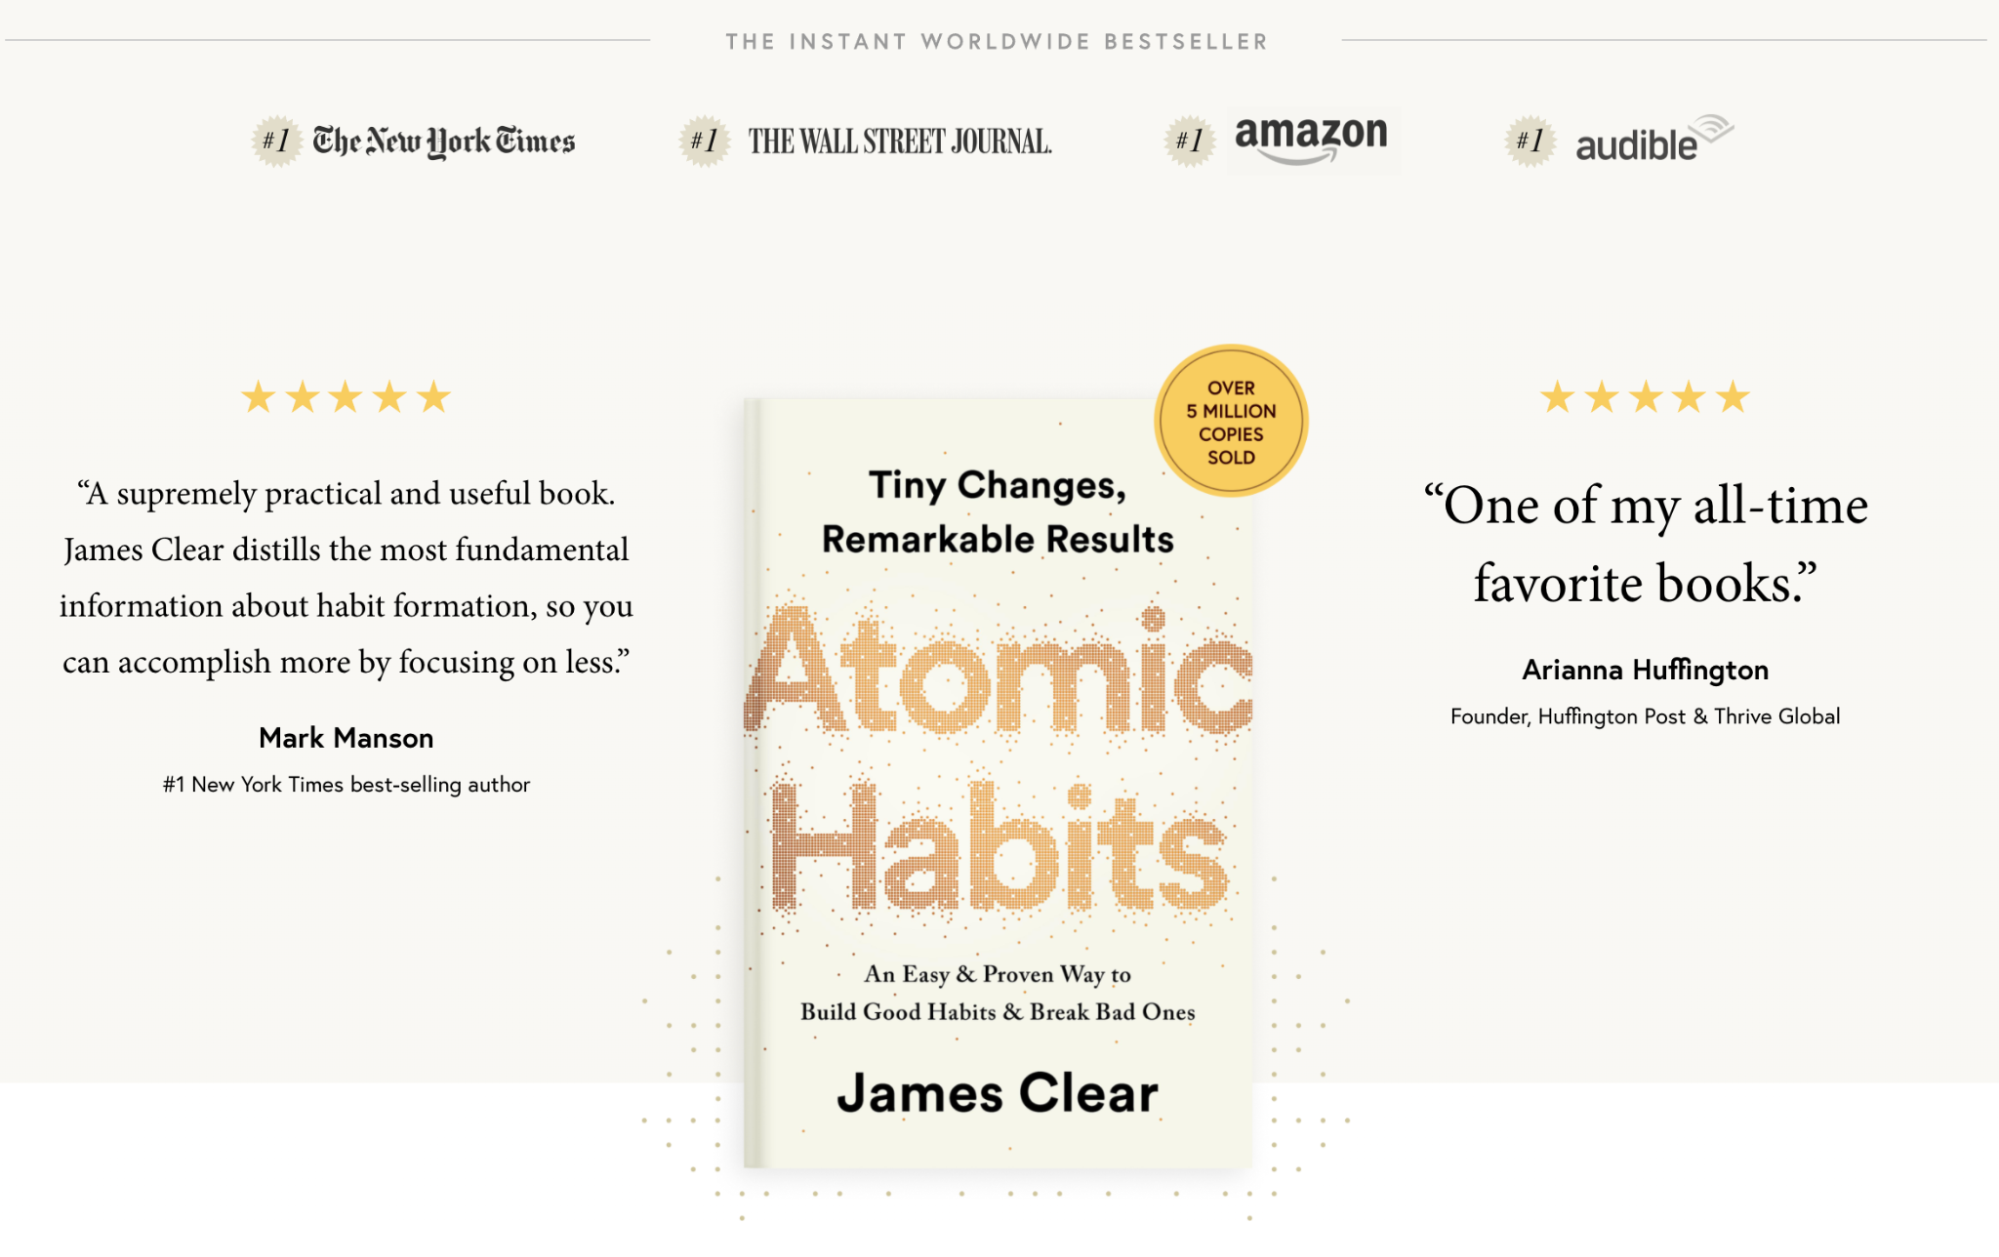 The landing page for Atomic Habits with five-star reviews from Mark Manson and Arianna Huffington